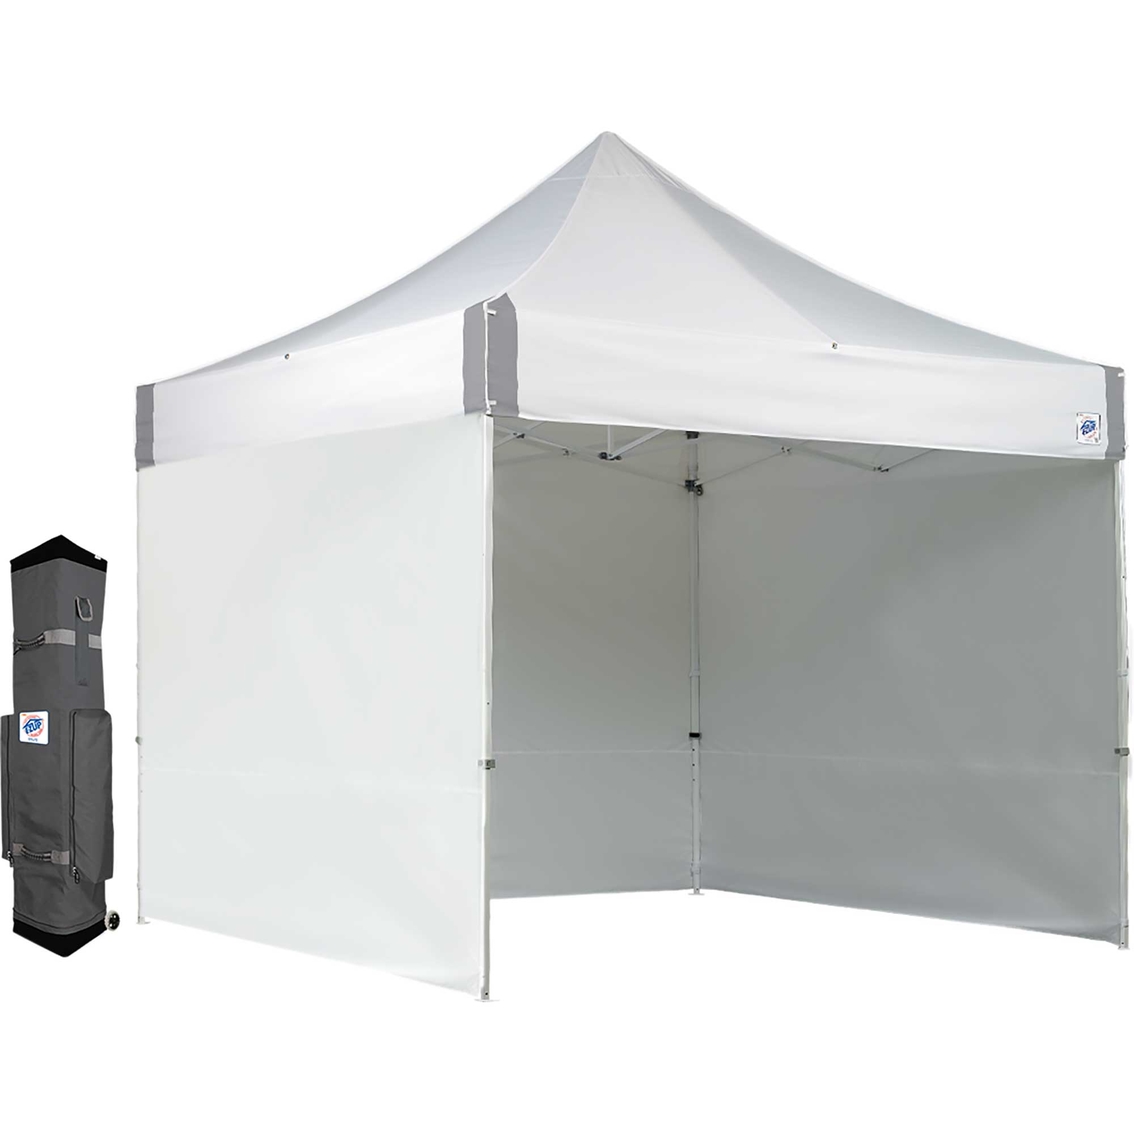 International EZ-Up ES100S 4 Wall Instant Shelter Canopy 10 x 10 ft.